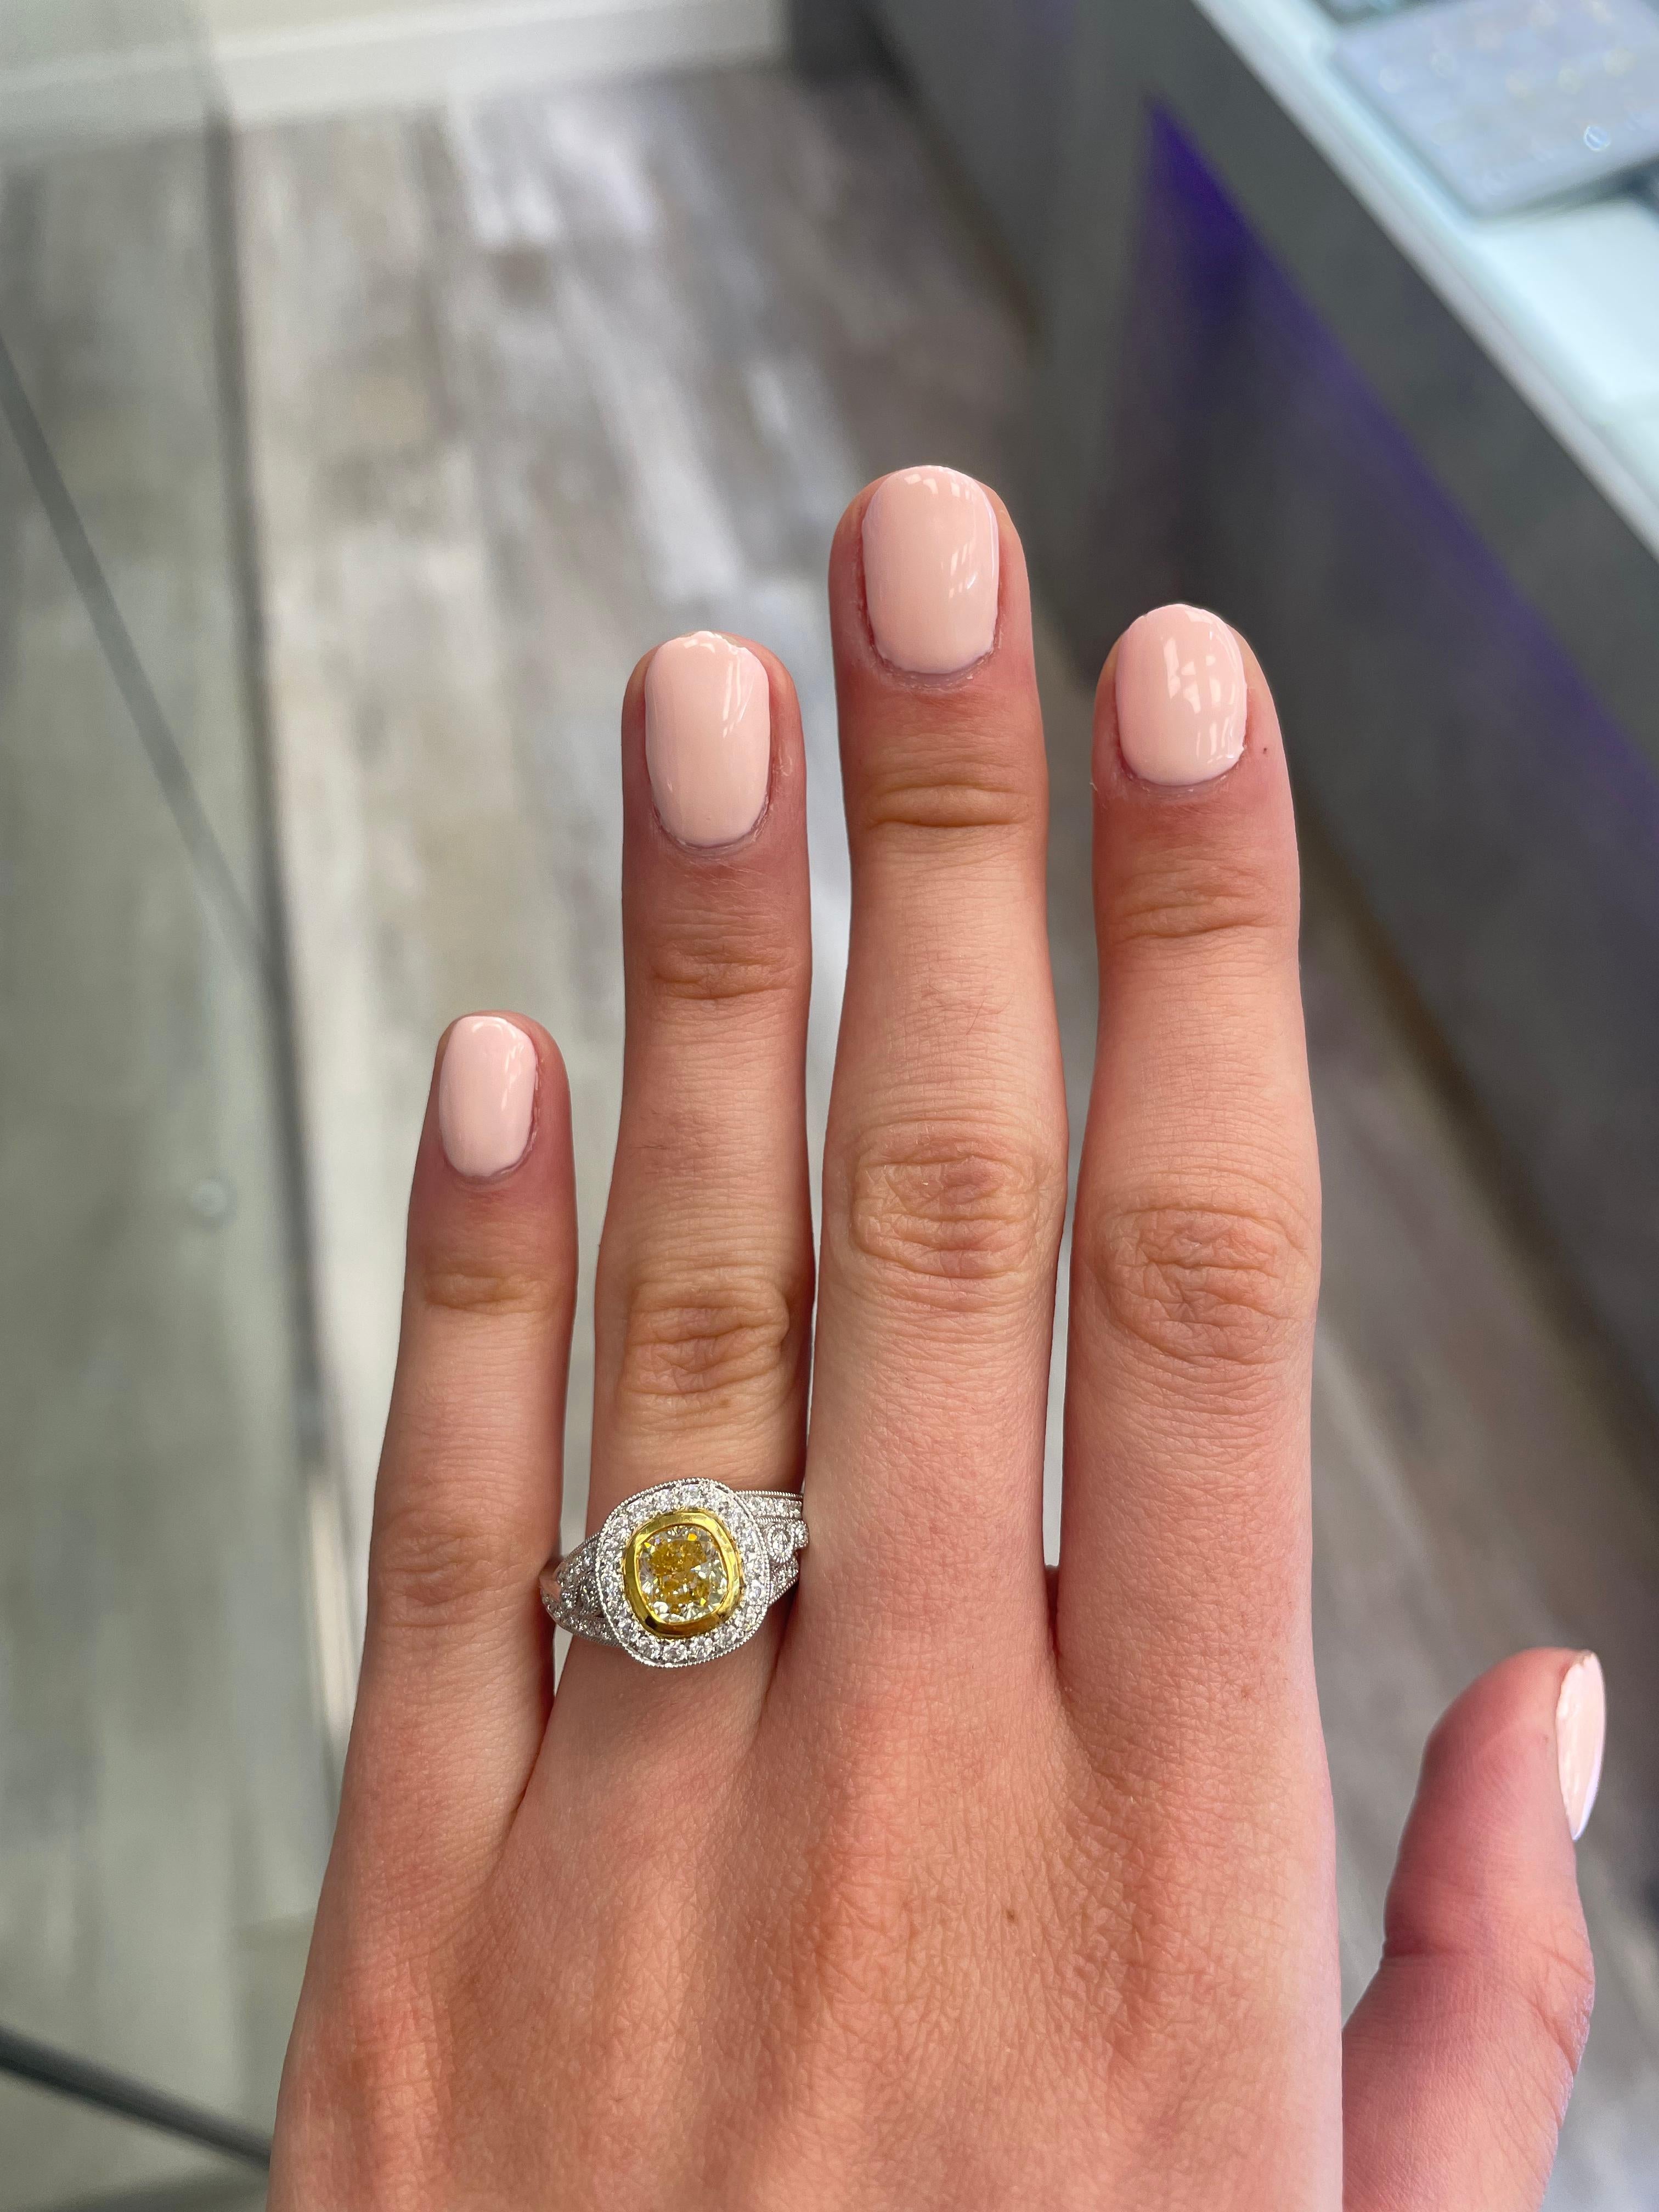 Stunning modern EGL certified yellow diamond with halo ring, two-tone 18k yellow and white gold. By Alexander Beverly Hills
2.36 carats total diamond weight.
1.31 carat cushion cut Fancy Intense Yellow color and SI2 clarity diamond, EGL graded.